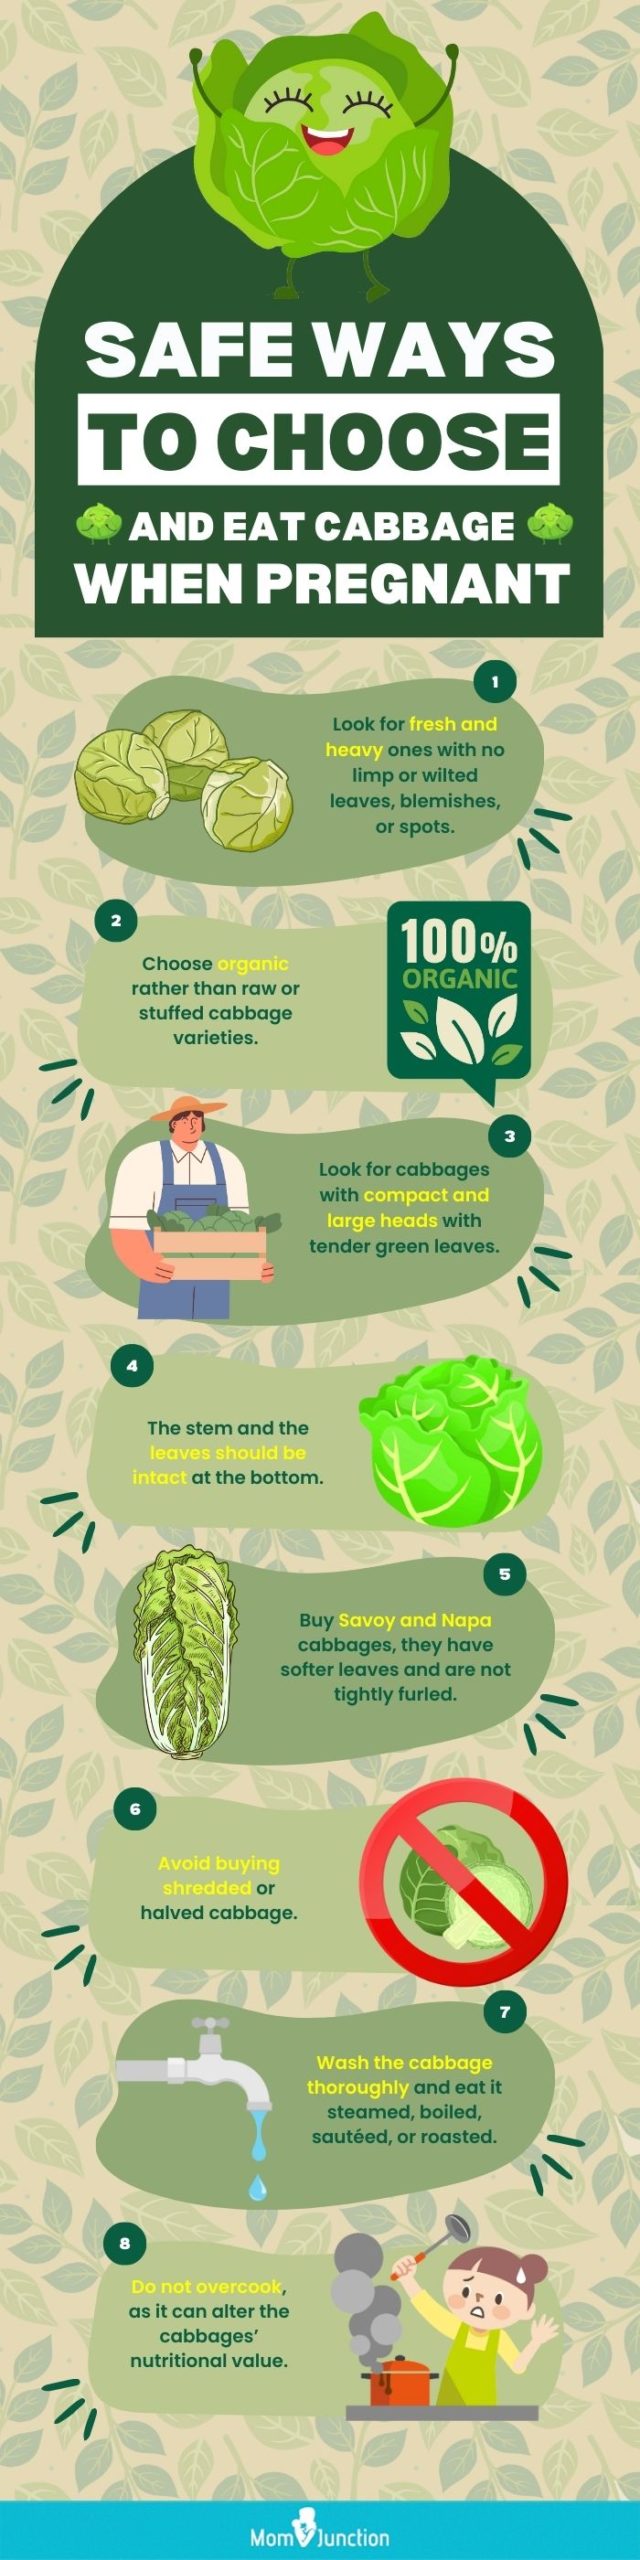 safe ways to choose and eat cabbage when pregnant (infographic)